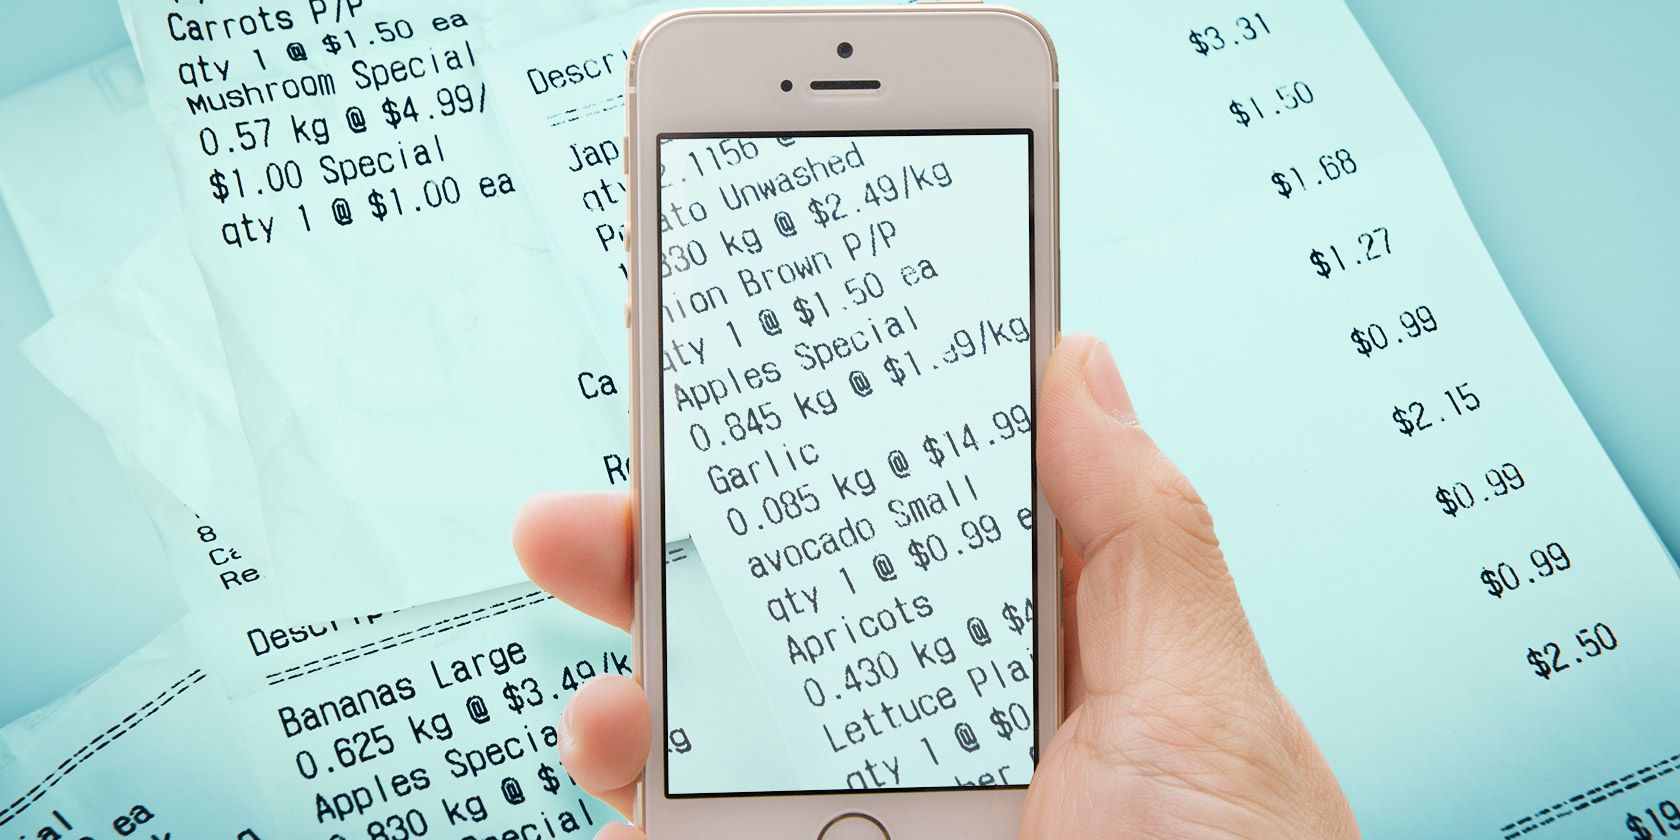 app for business receipts